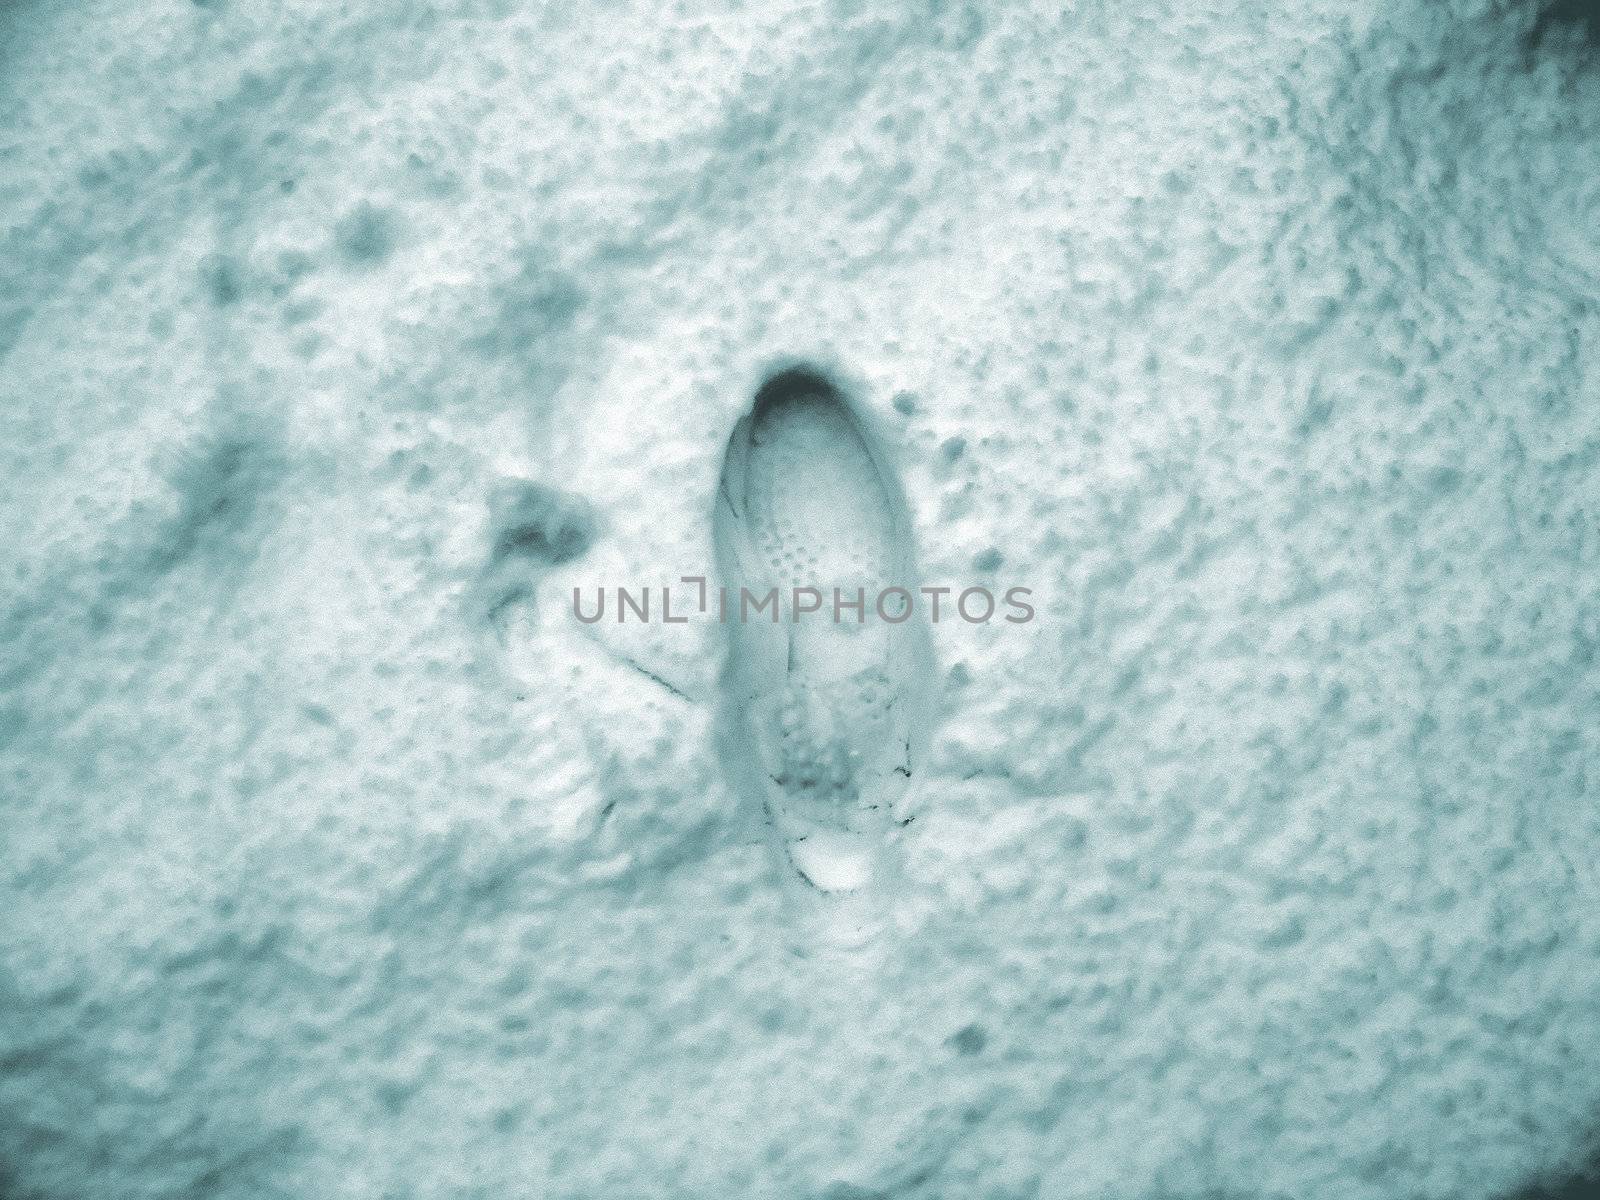 A footprint in the snow